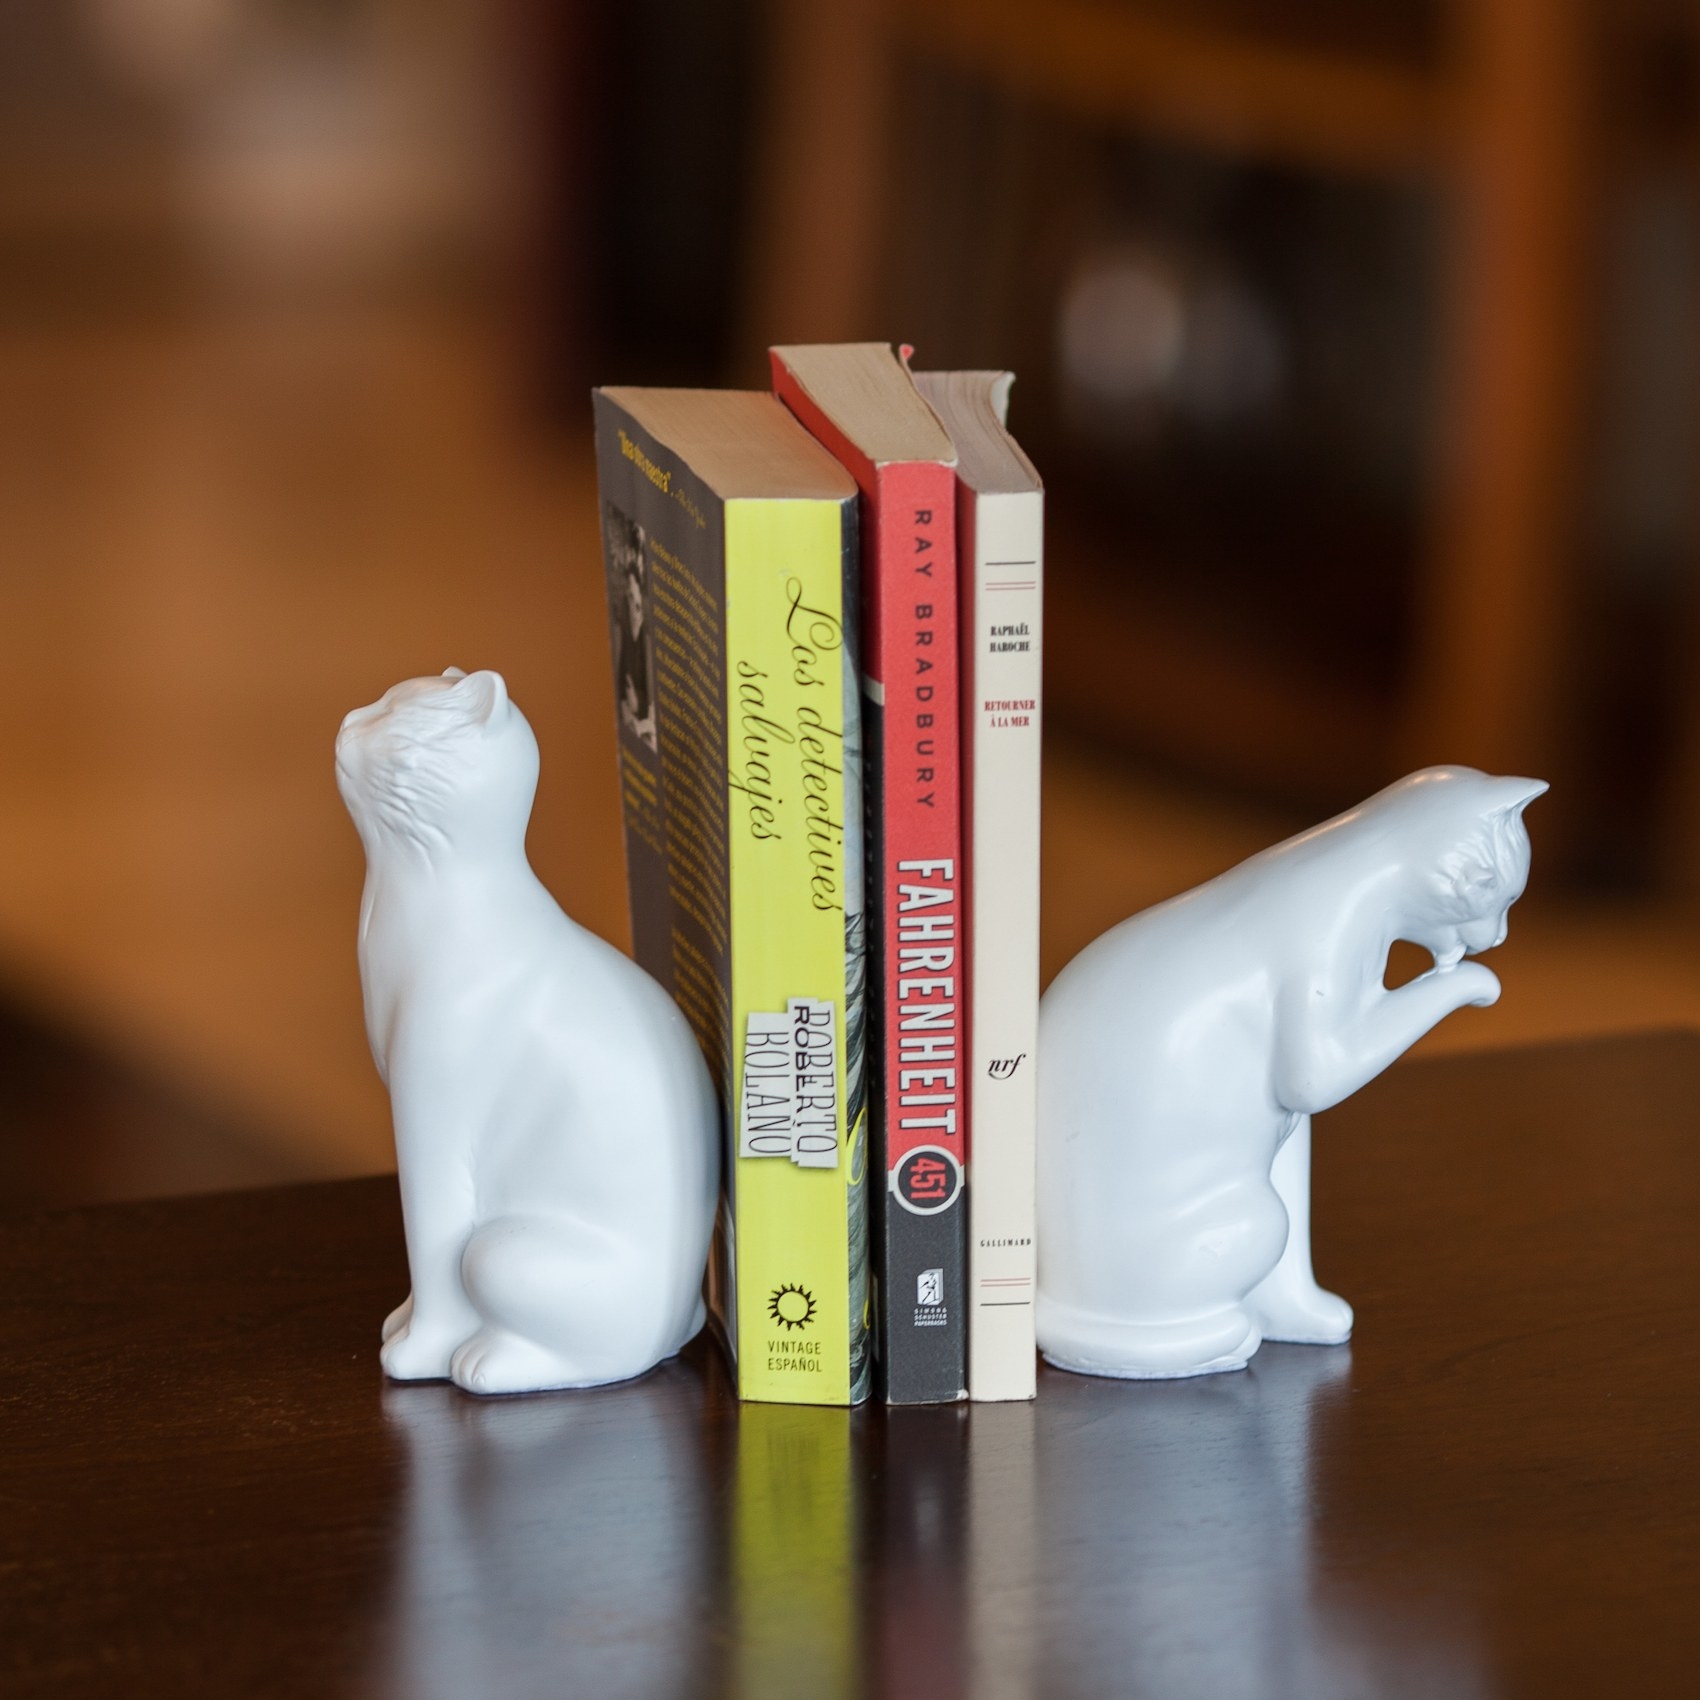 The white cat bookends on a bookshelf